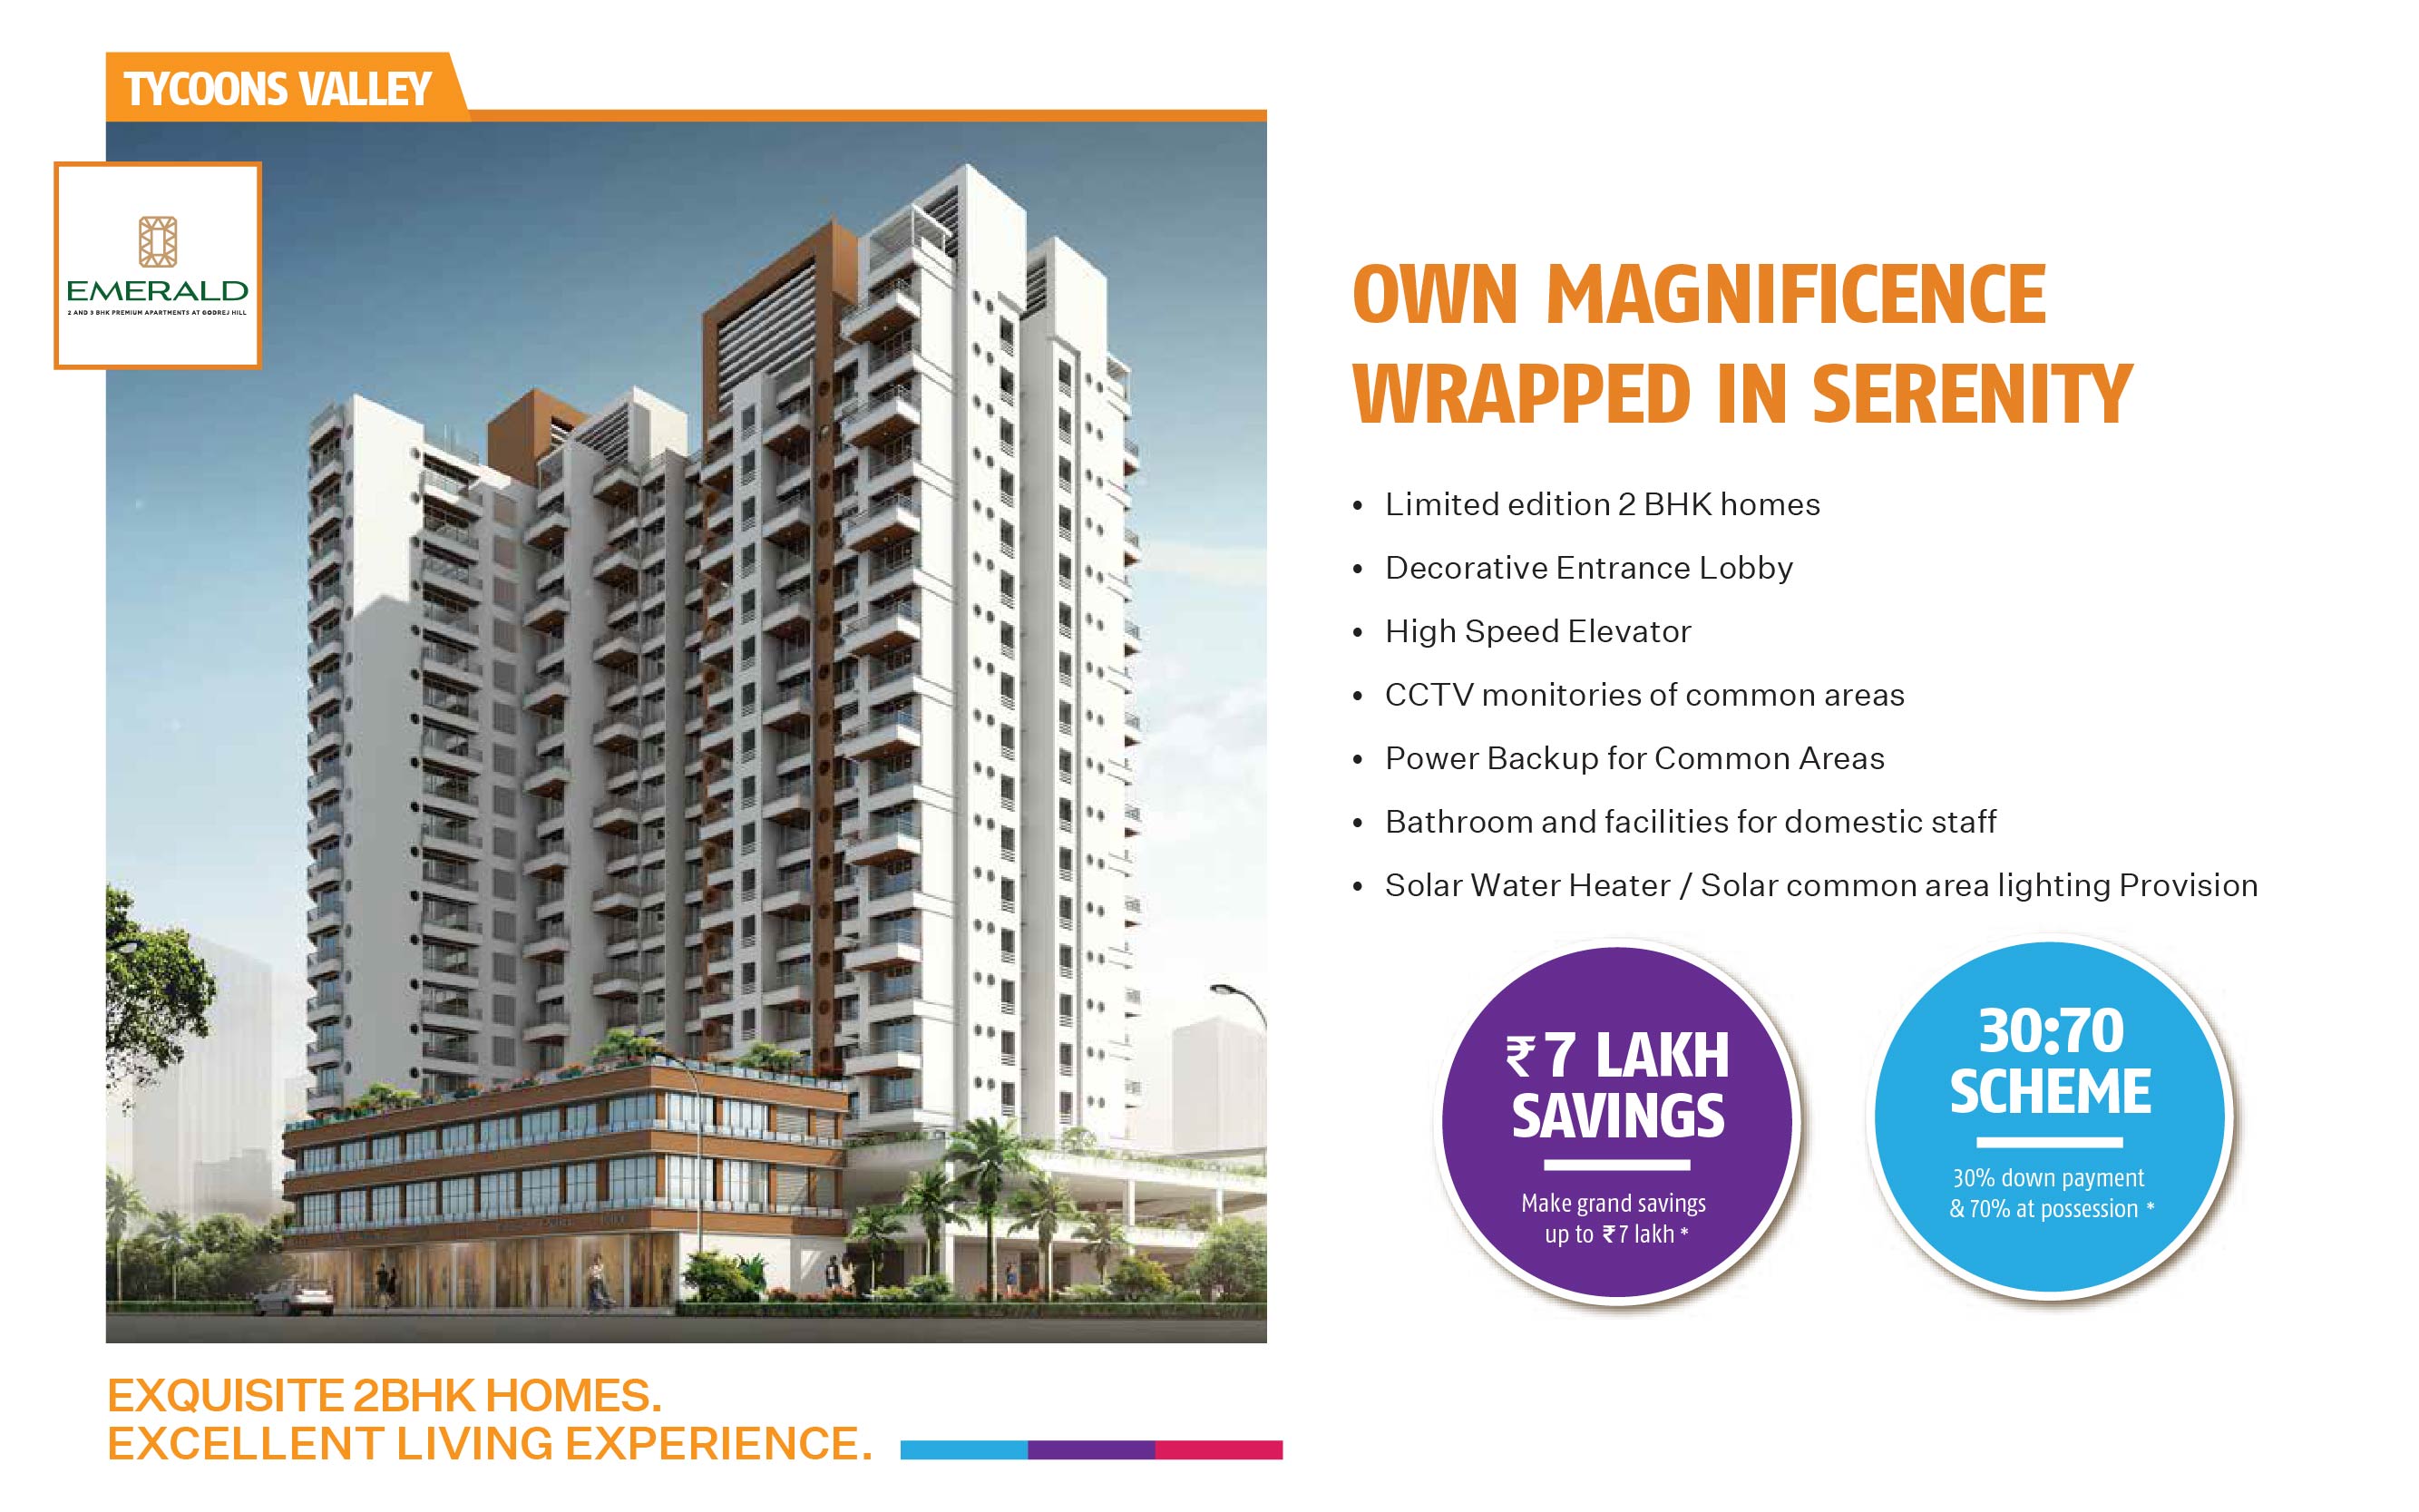 Limited edition 2 BHK homes